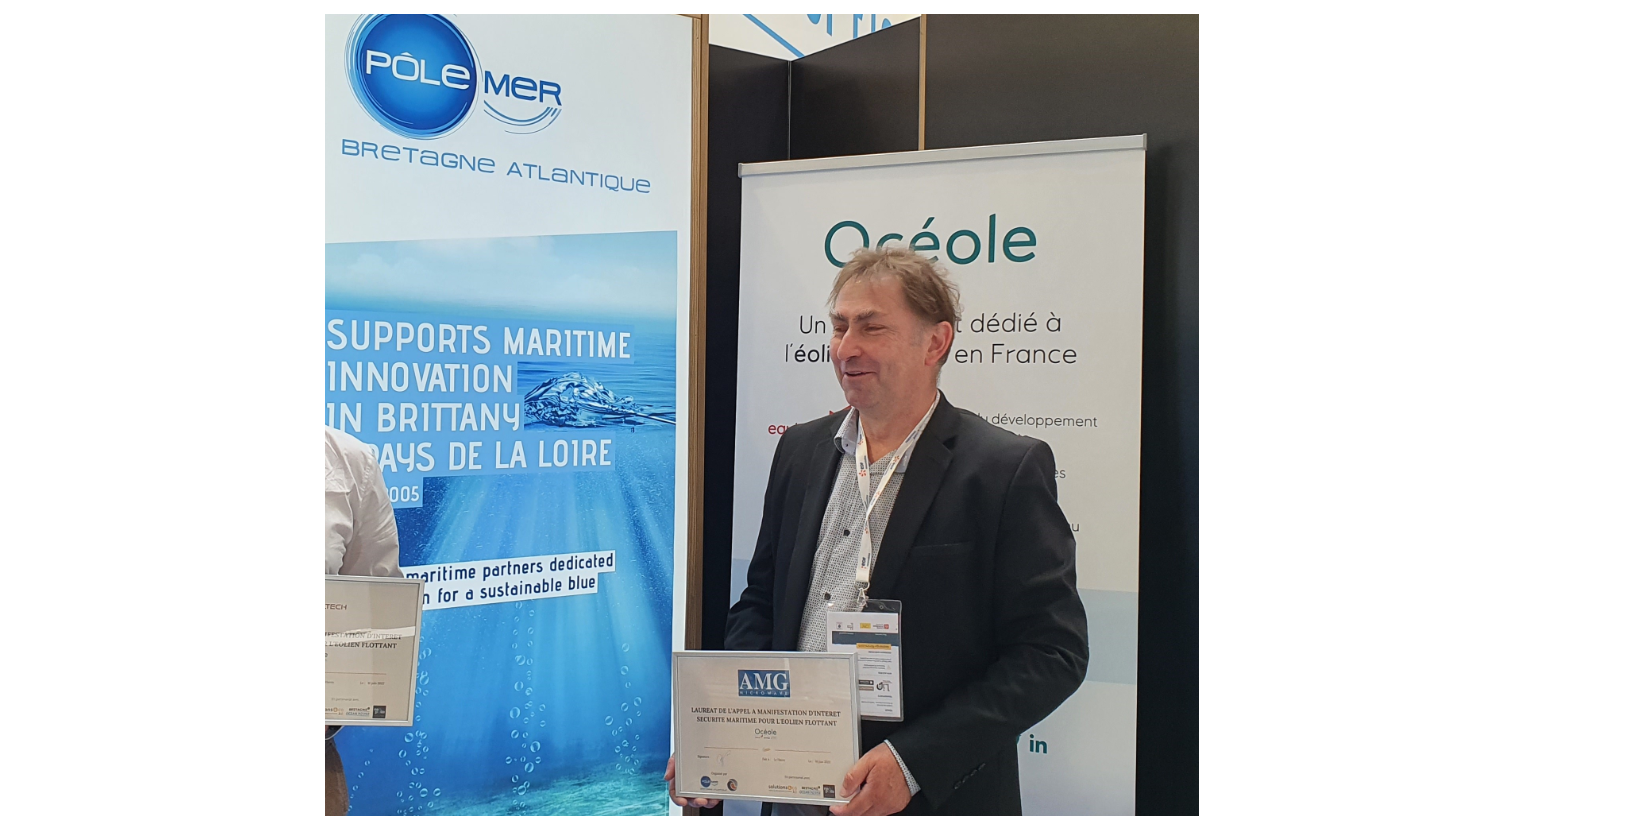 AMG WINS THE “MARITIME SAFETY FOR FLOATING WIND TURBINES” AWARD